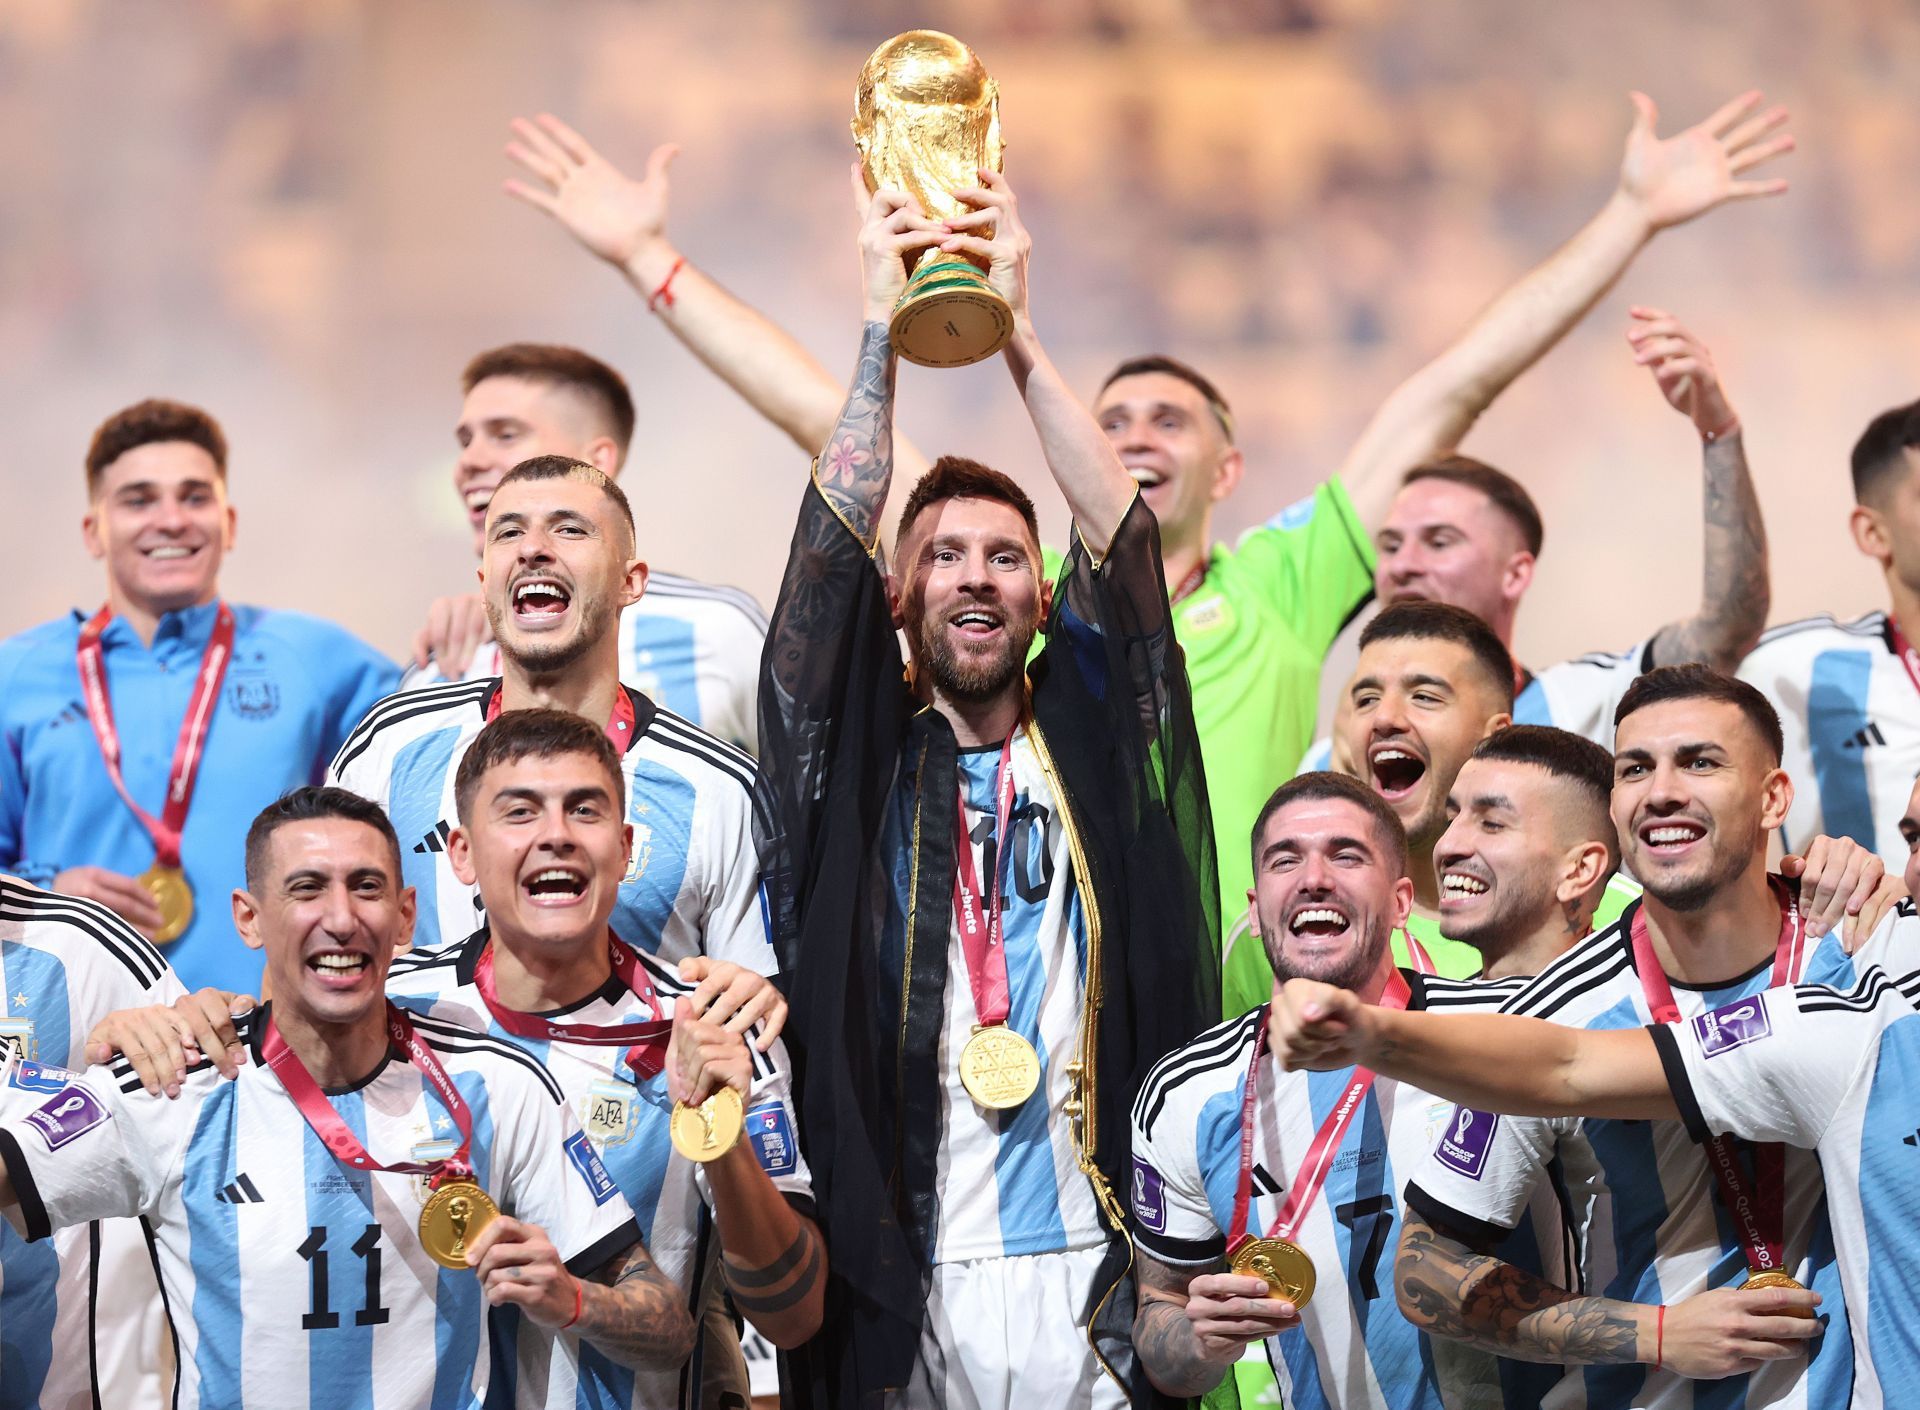 The Argentine won the World Cup with Argentina on Sunday